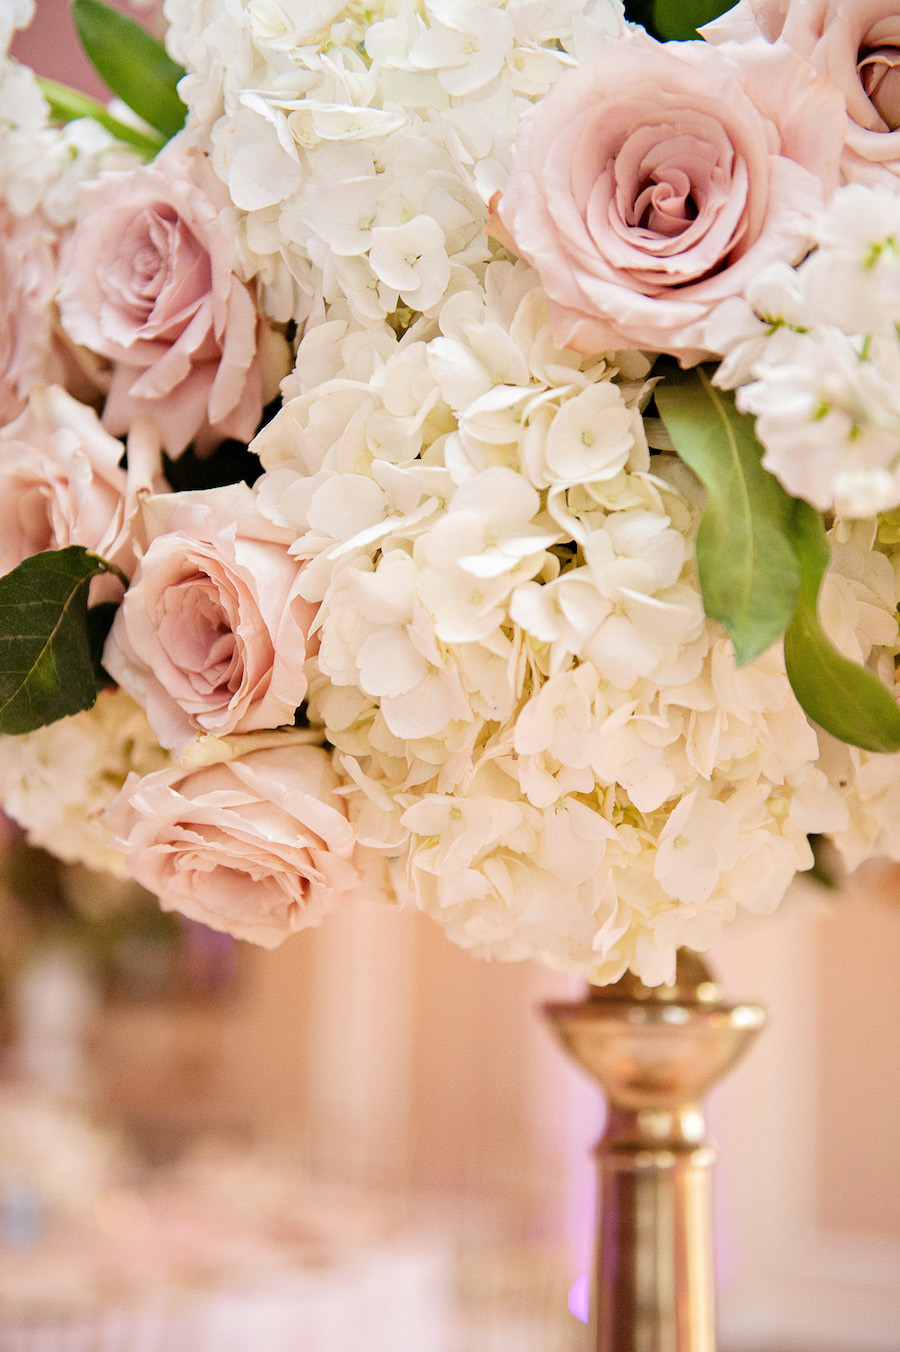 Tall White Hydrangea and Blush Pink Rose Wedding Centerpiece Flowers in Gold Vase